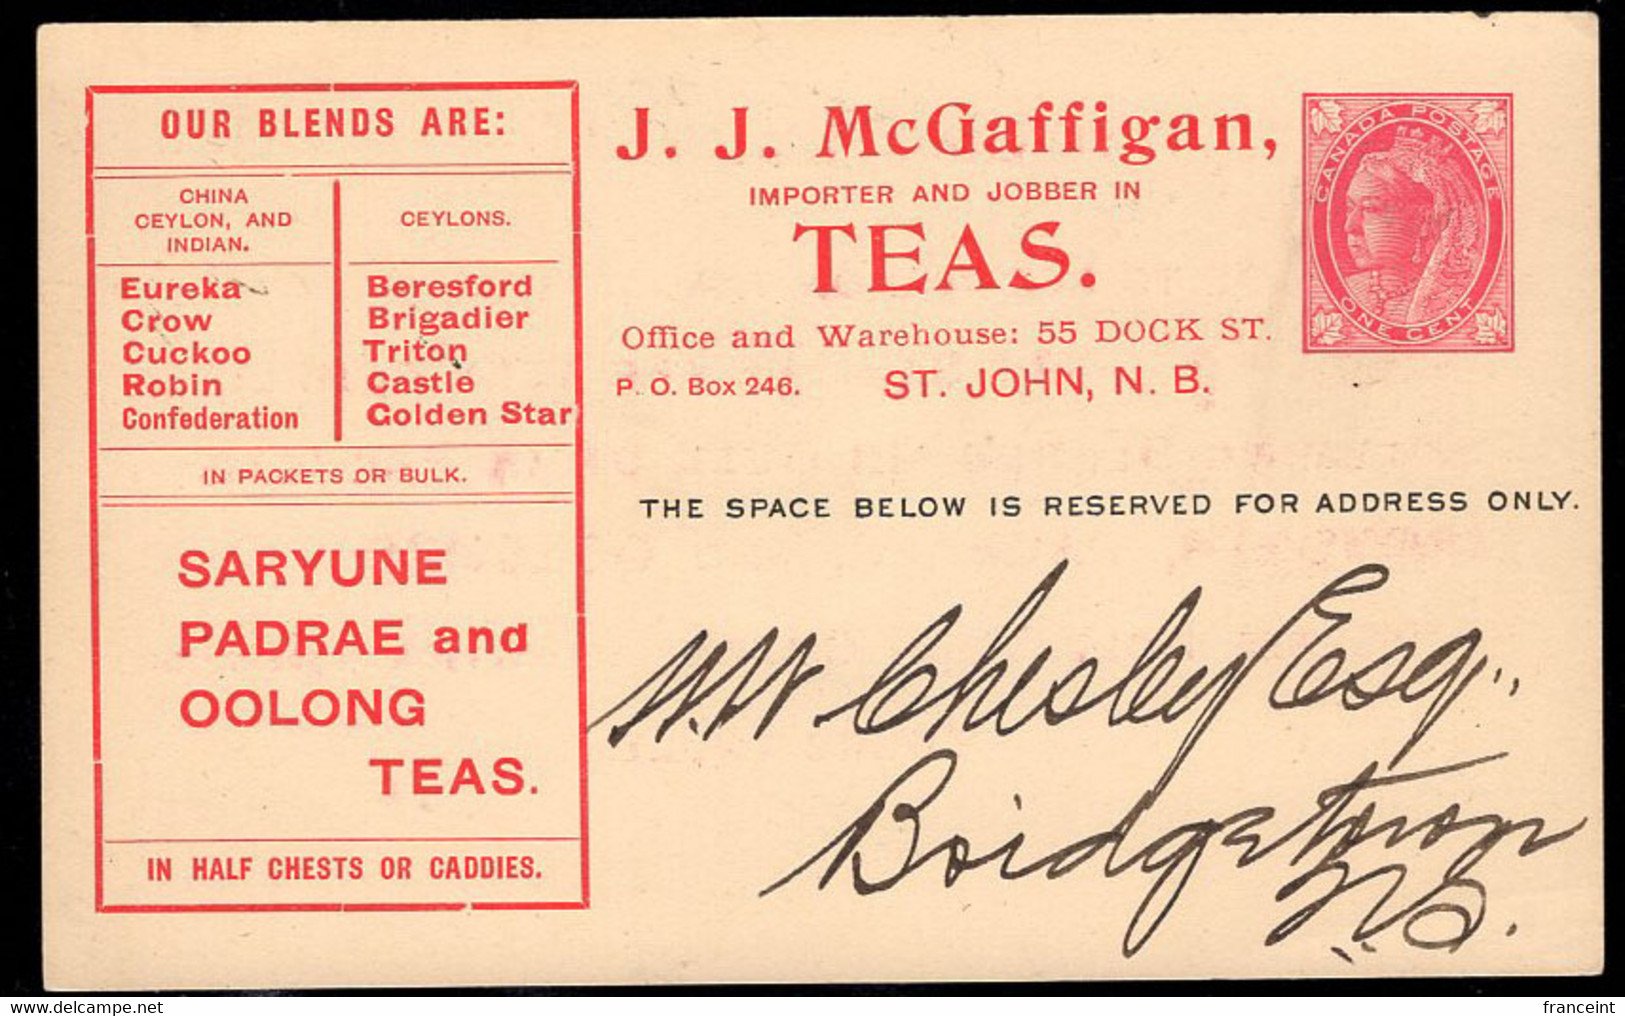 CANADA(1907) Teas. Postal Card With Printed Ad On Front And Printed Message On Back For J.J. McGaffin Teas. - 1903-1954 De Koningen